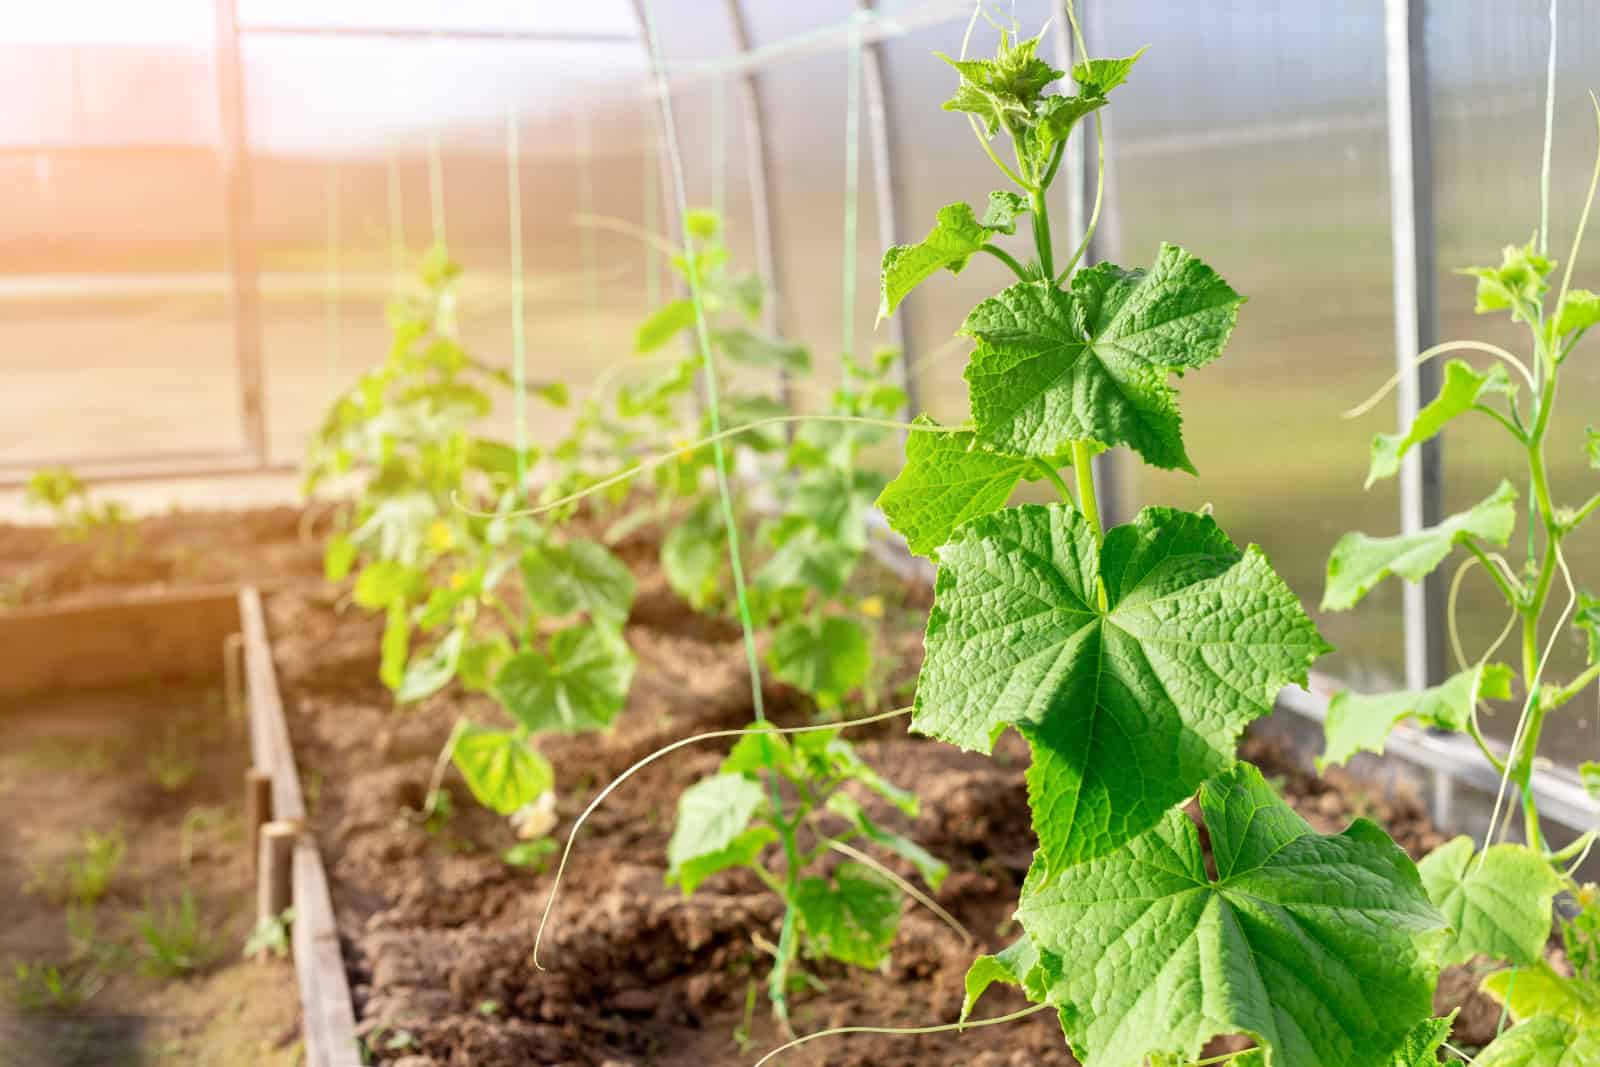 Cucumber seedlings are tied in a greenhouse